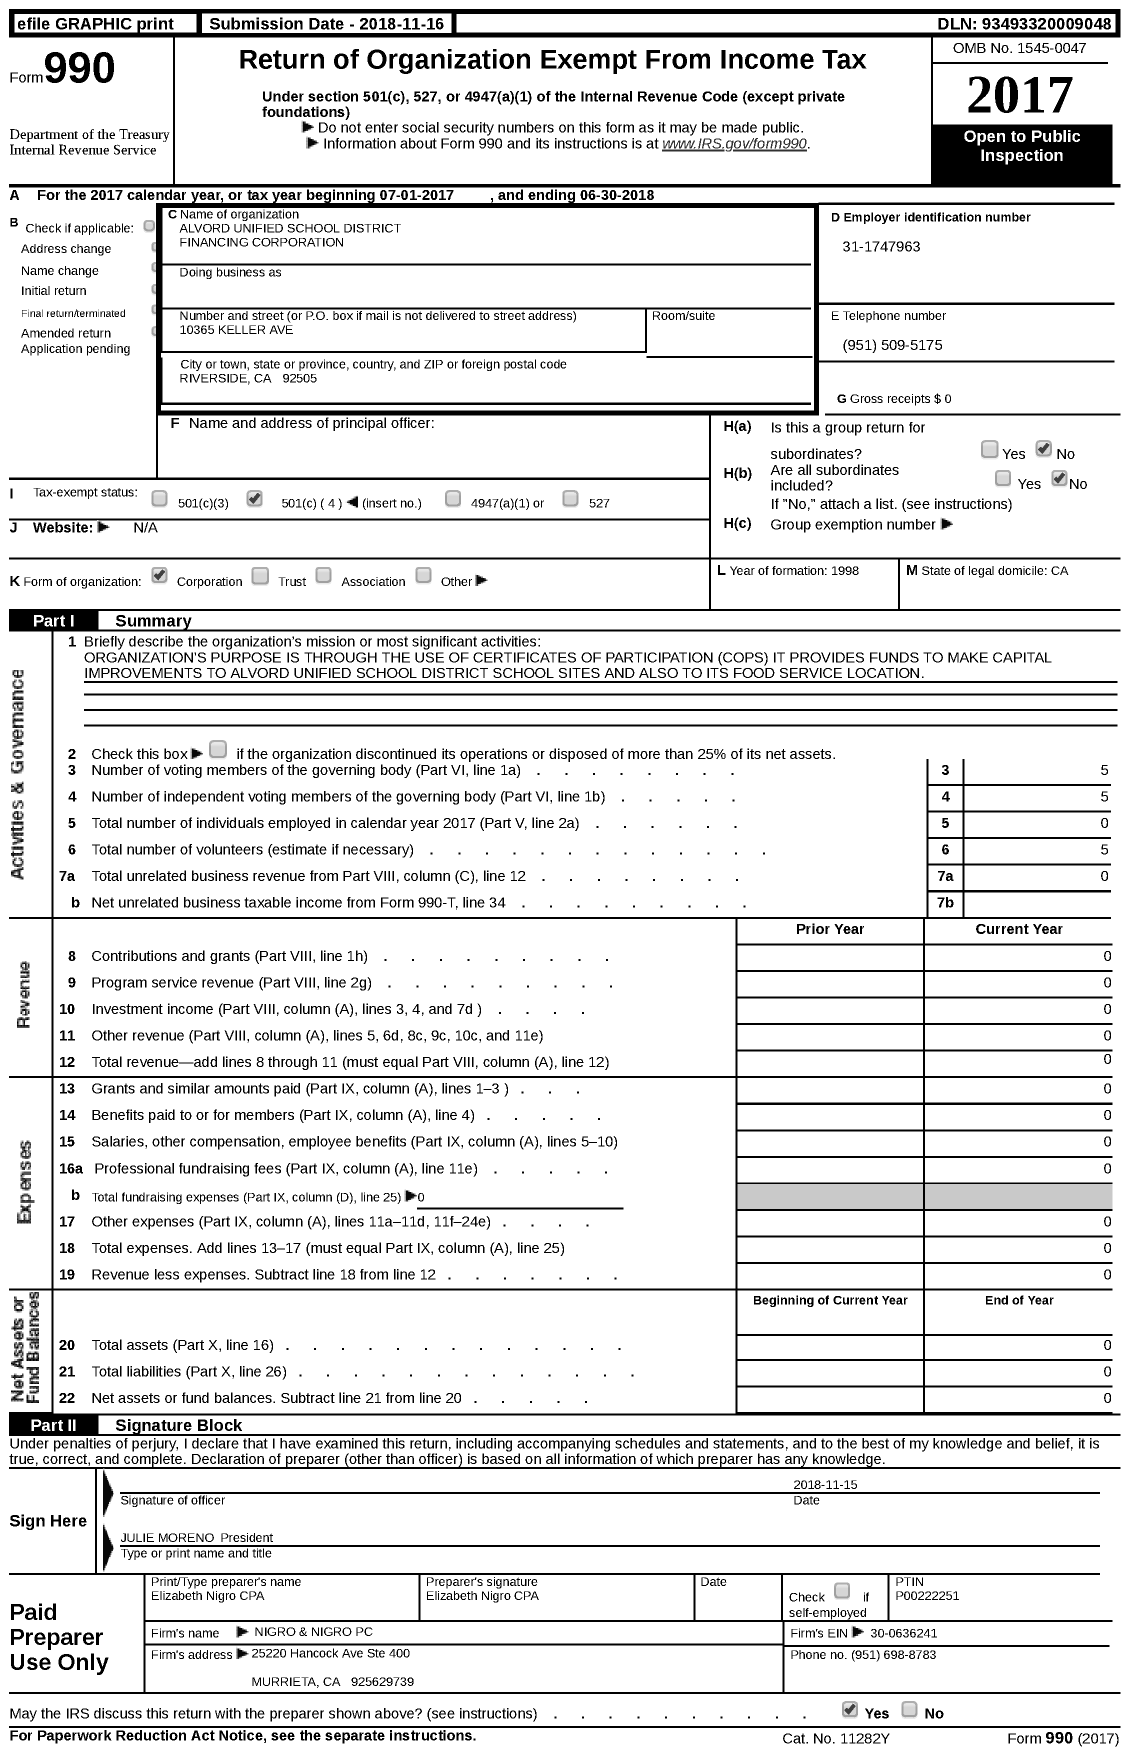 Image of first page of 2017 Form 990 for Alvord Unified School District Financing Corporation